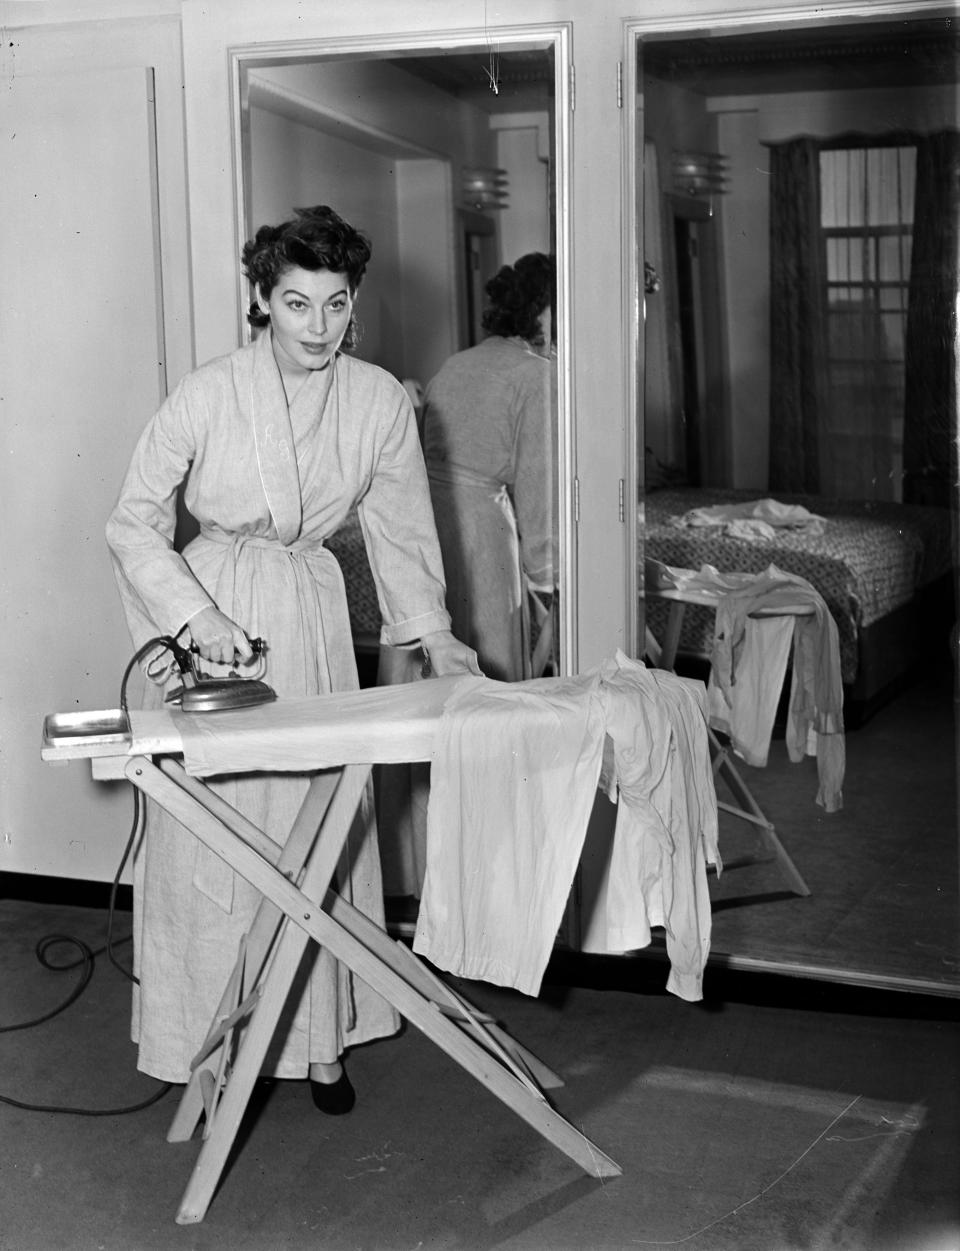 Gardner takes a break from the glitter to iron her pajamas in this 1950 photo.